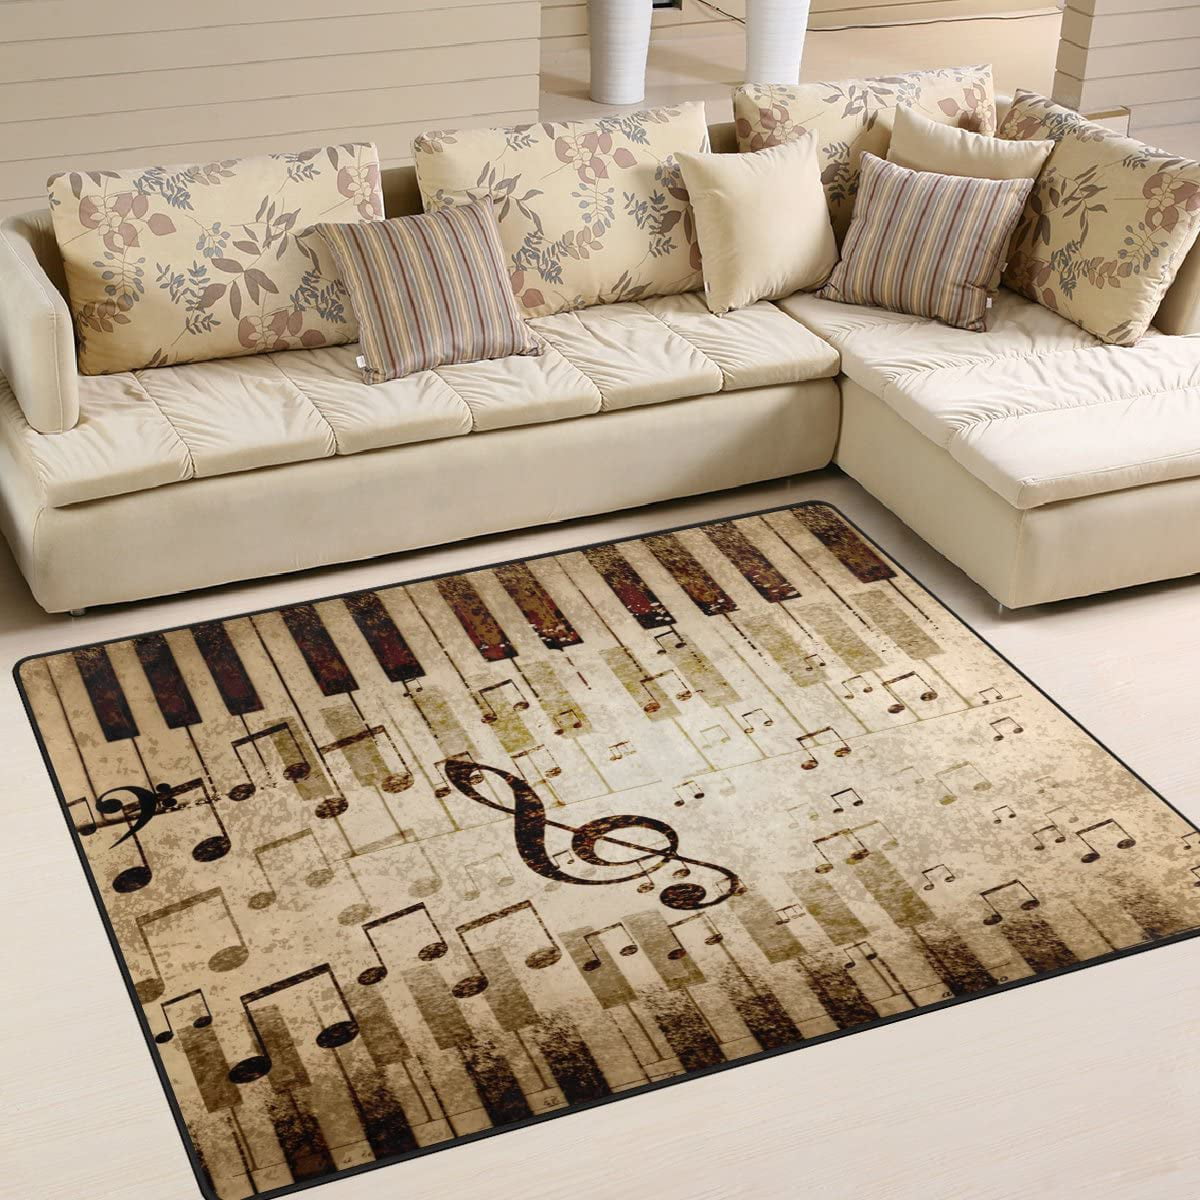 ALAZA Vintage Stylish Music Collection Area Mat Rug Rugs for Living Room Bedroom Kitchen 2' x 6'